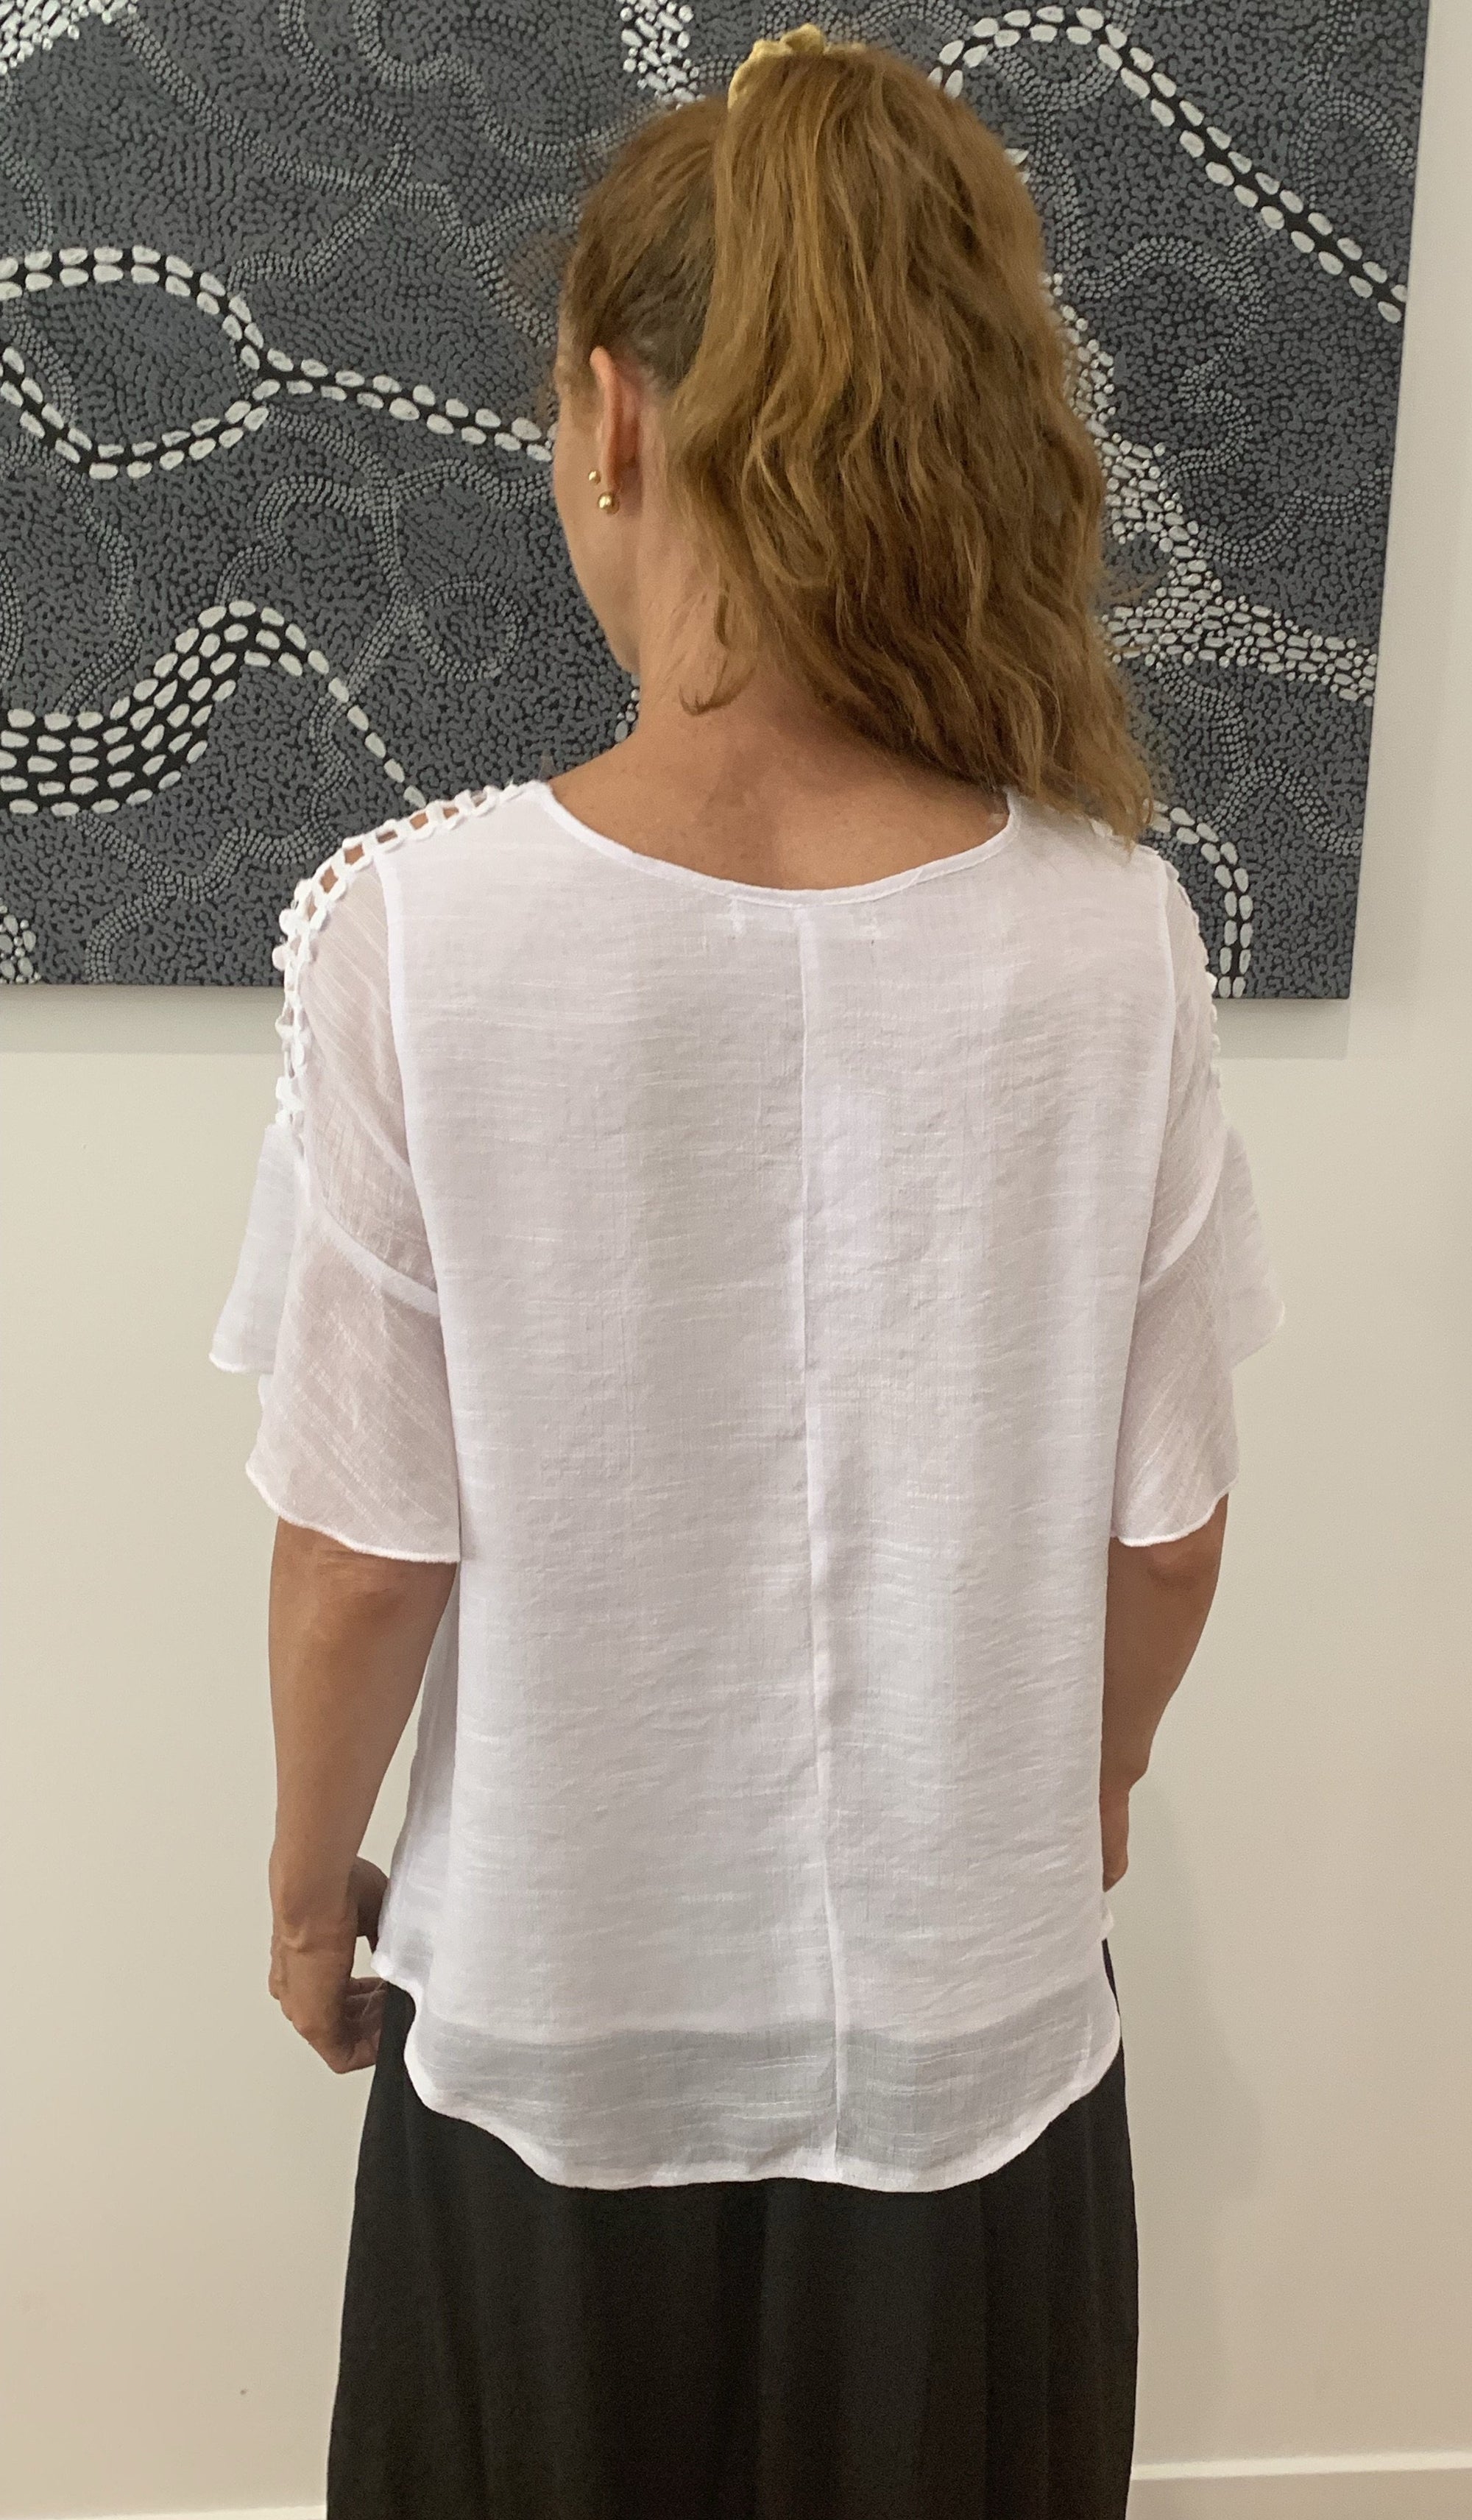 Super White Top with Frill 1/2 Long Sleeves in Super Comfy Cotton Blend